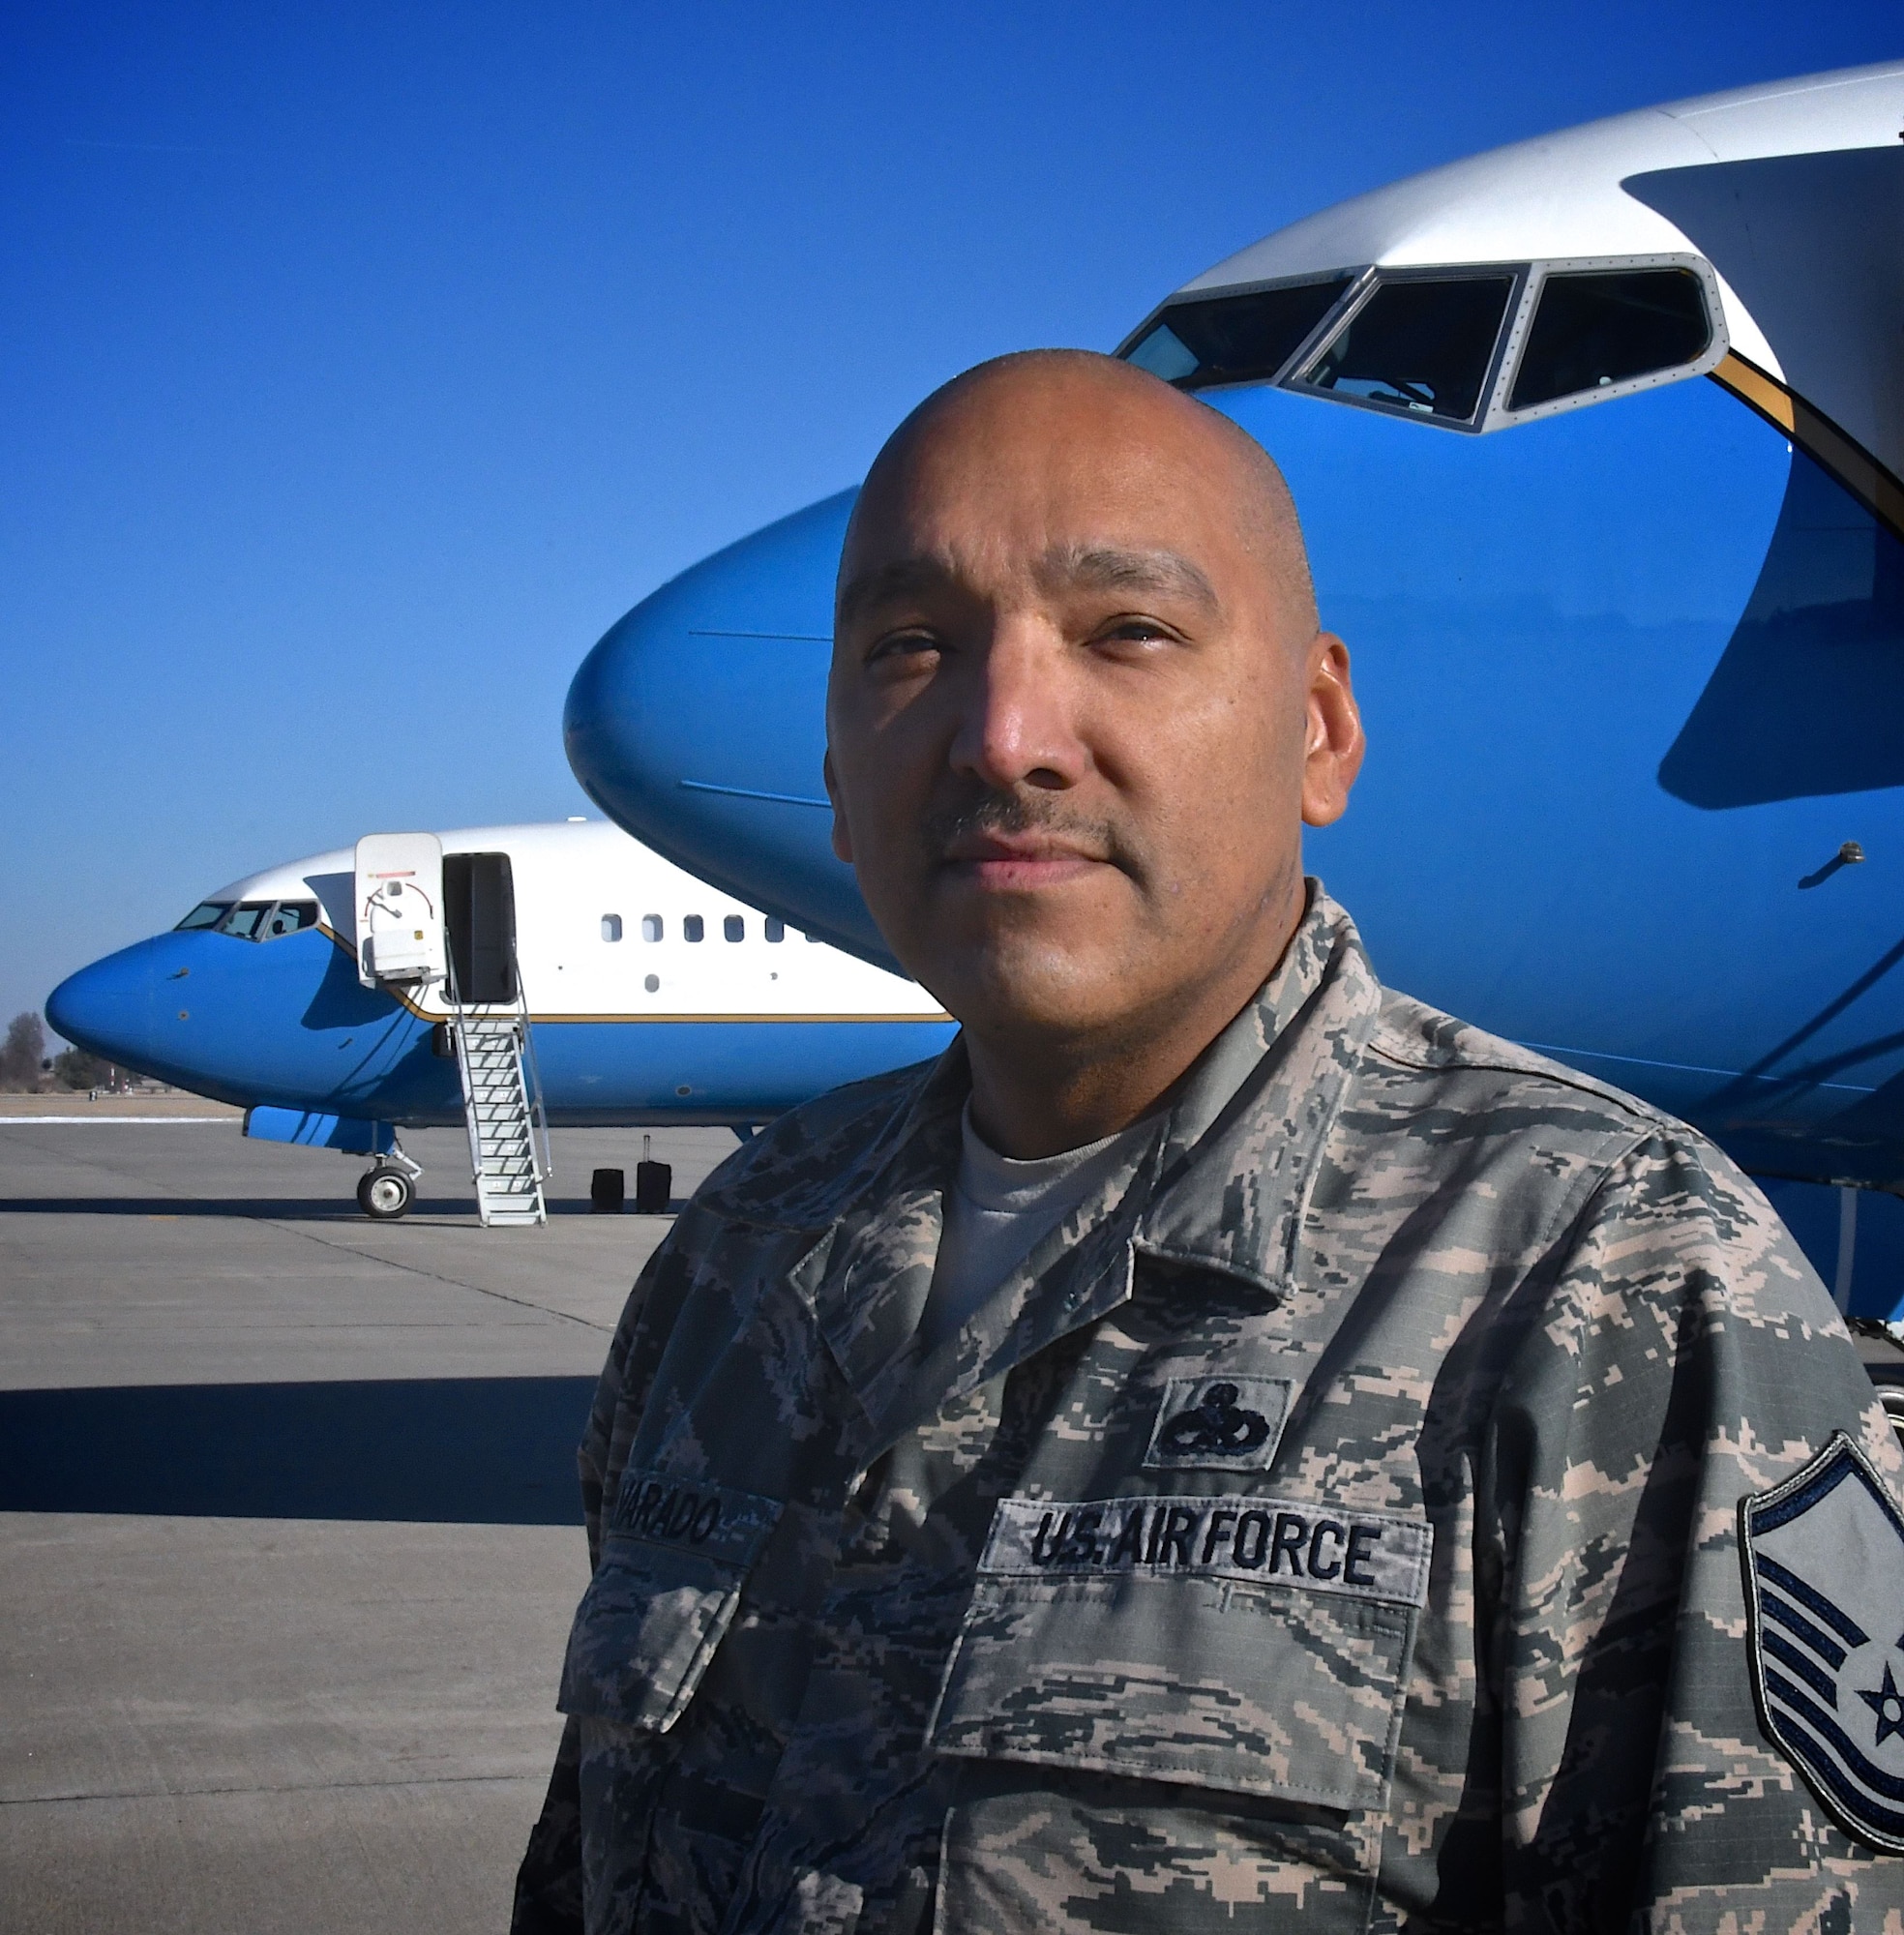 932nd aircraft maintainers earn black letter event for dedication to mission.